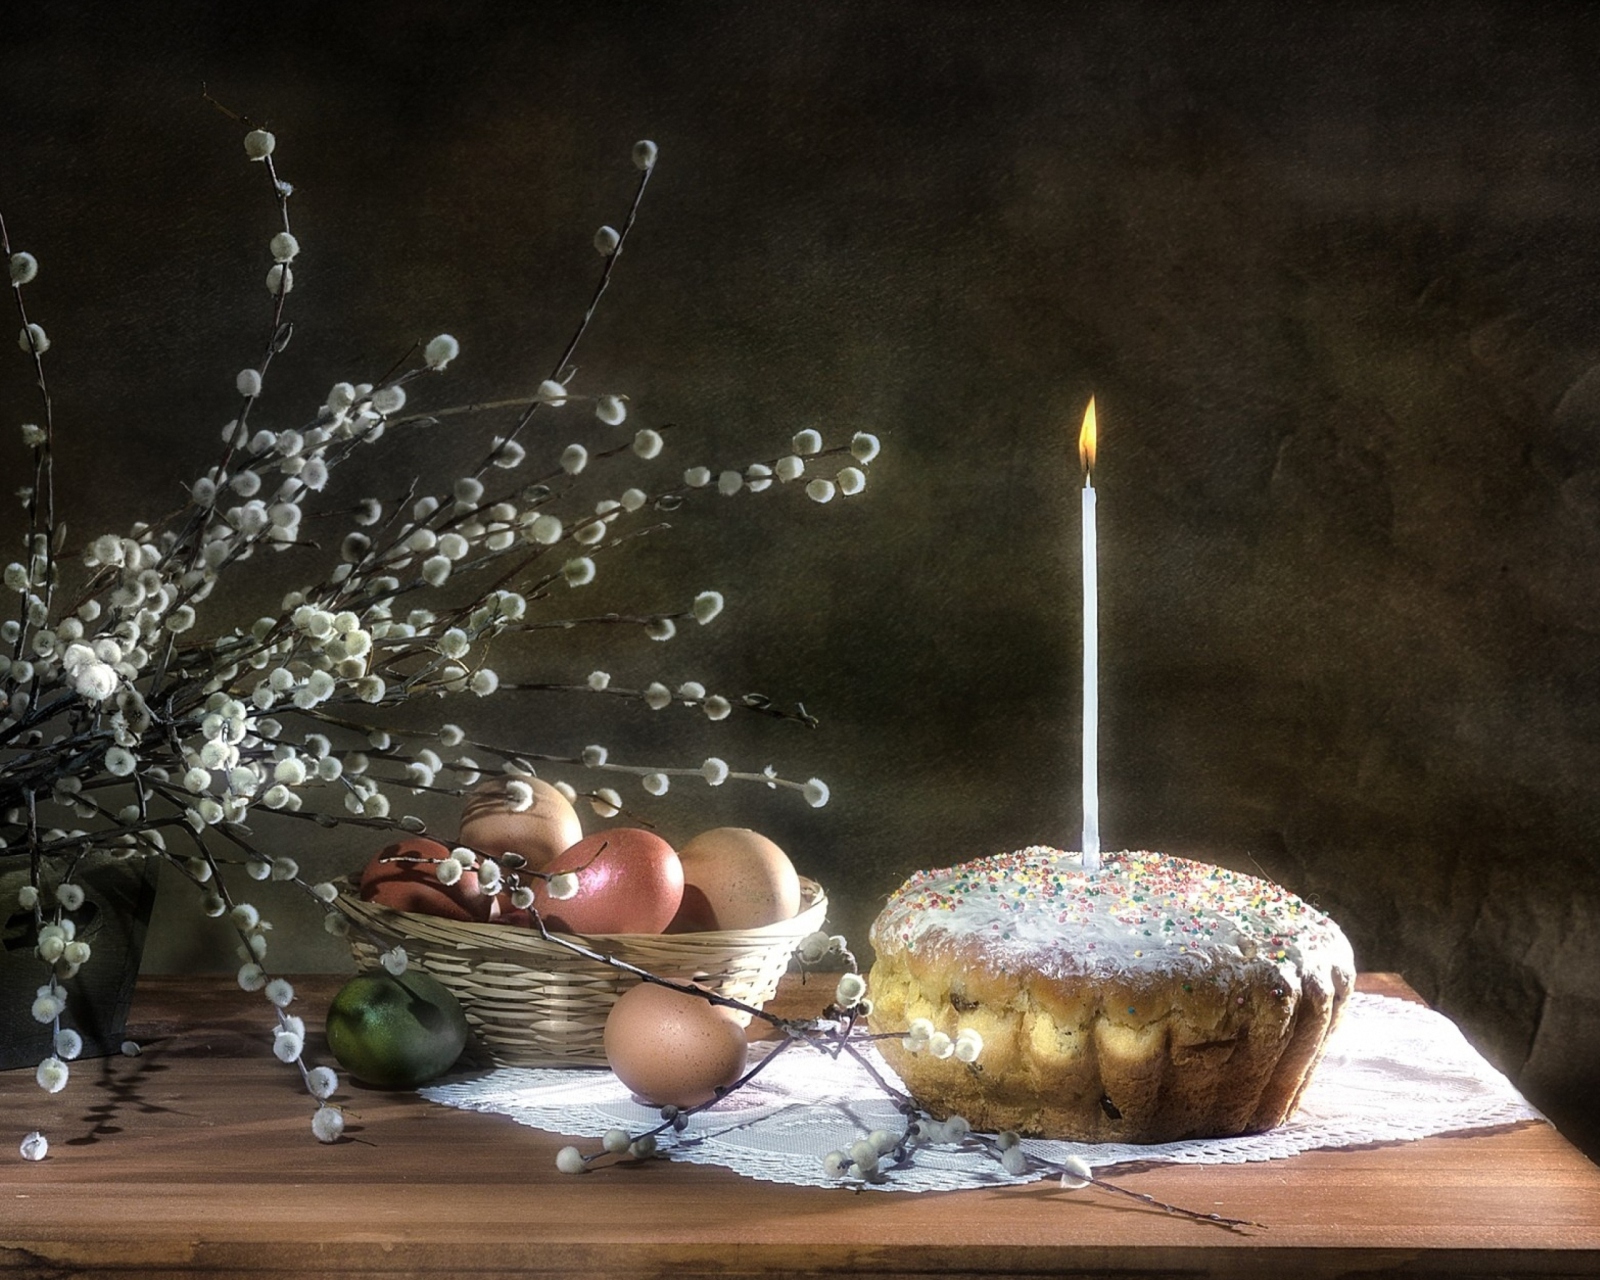 Das Easter Cake With Candle Wallpaper 1600x1280